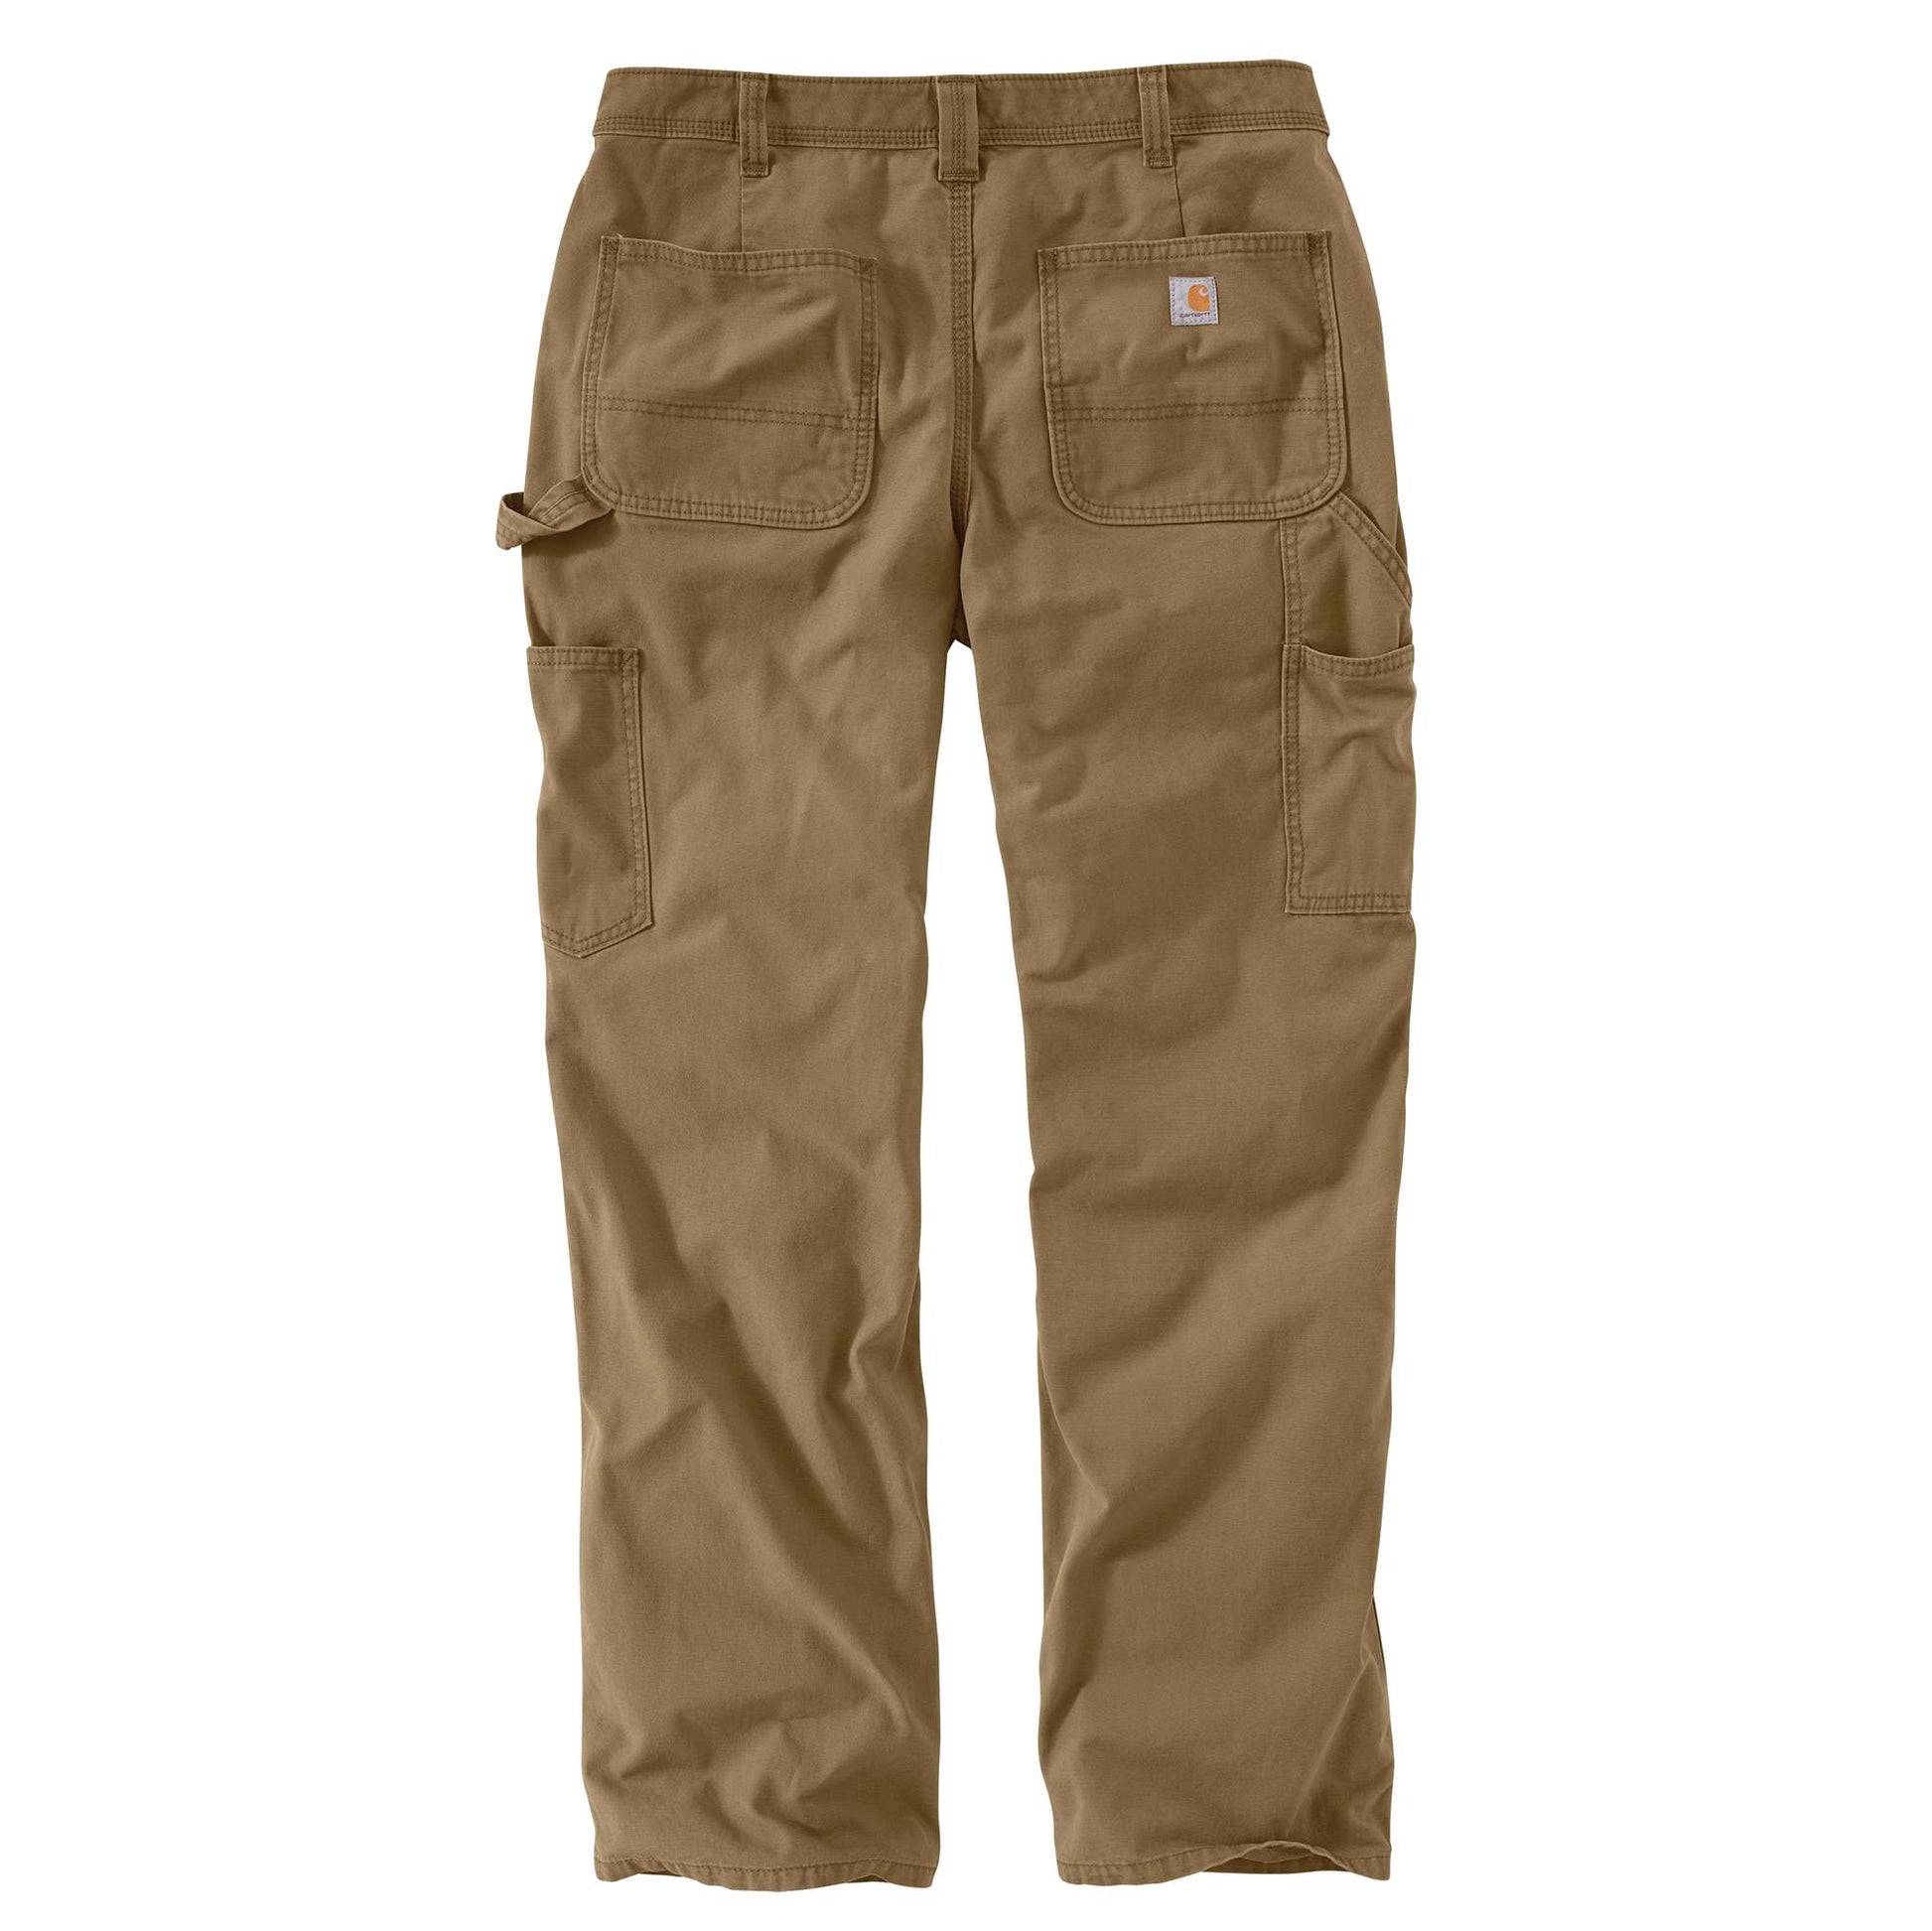 Carhartt Womens Rugged Professional Work Trousers Pants